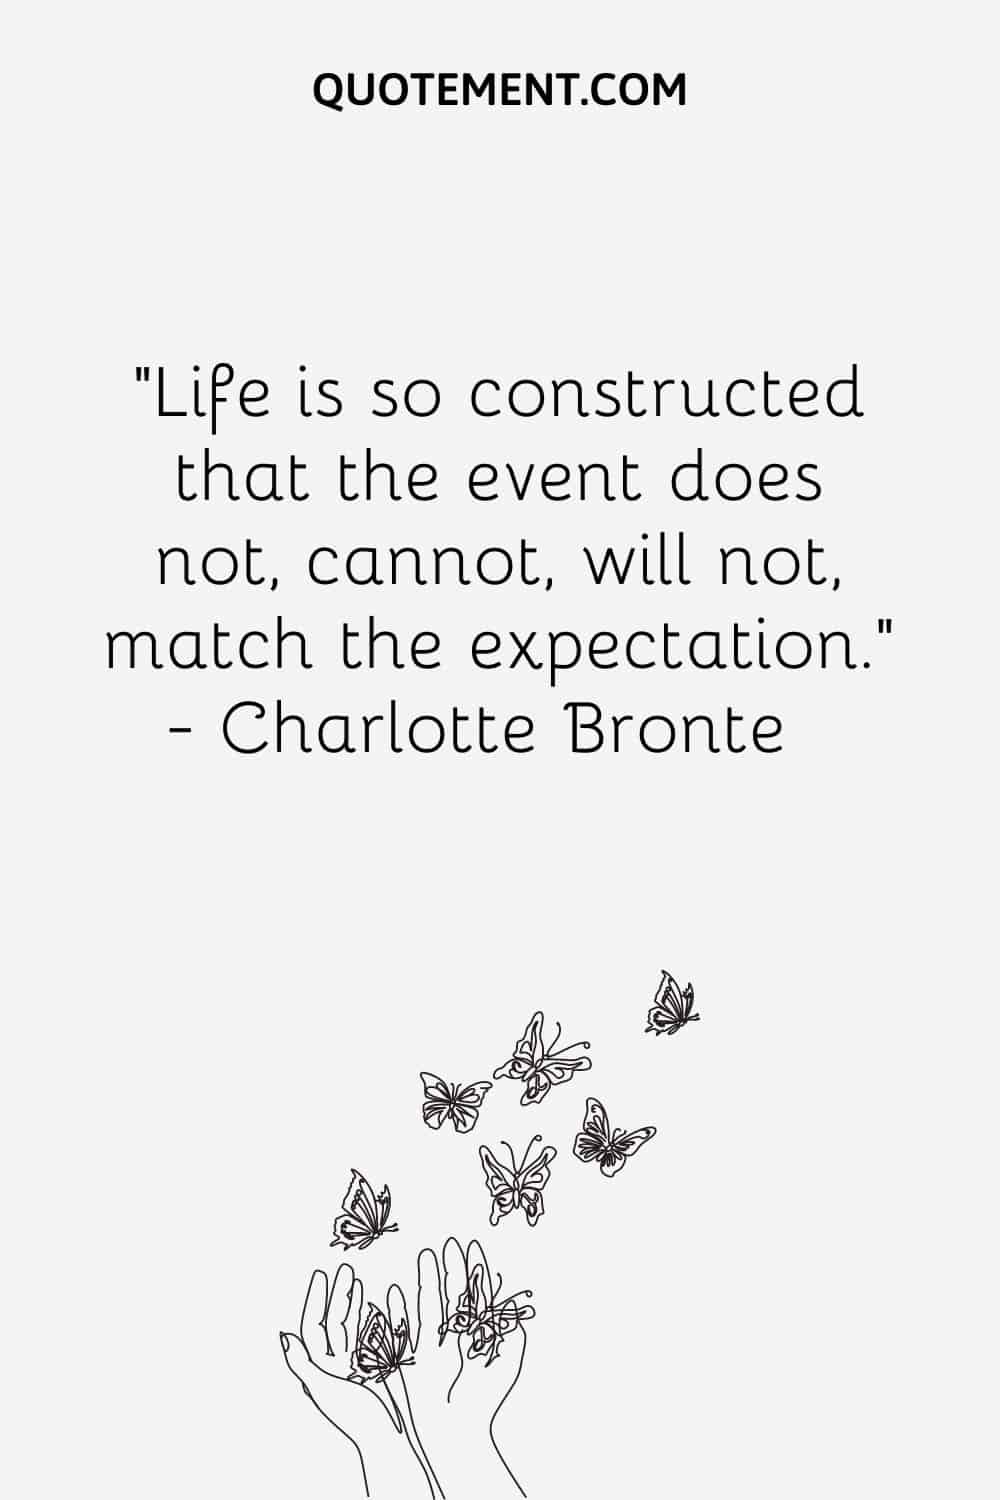 Life is so constructed that the event does not, cannot, will not, match the expectation